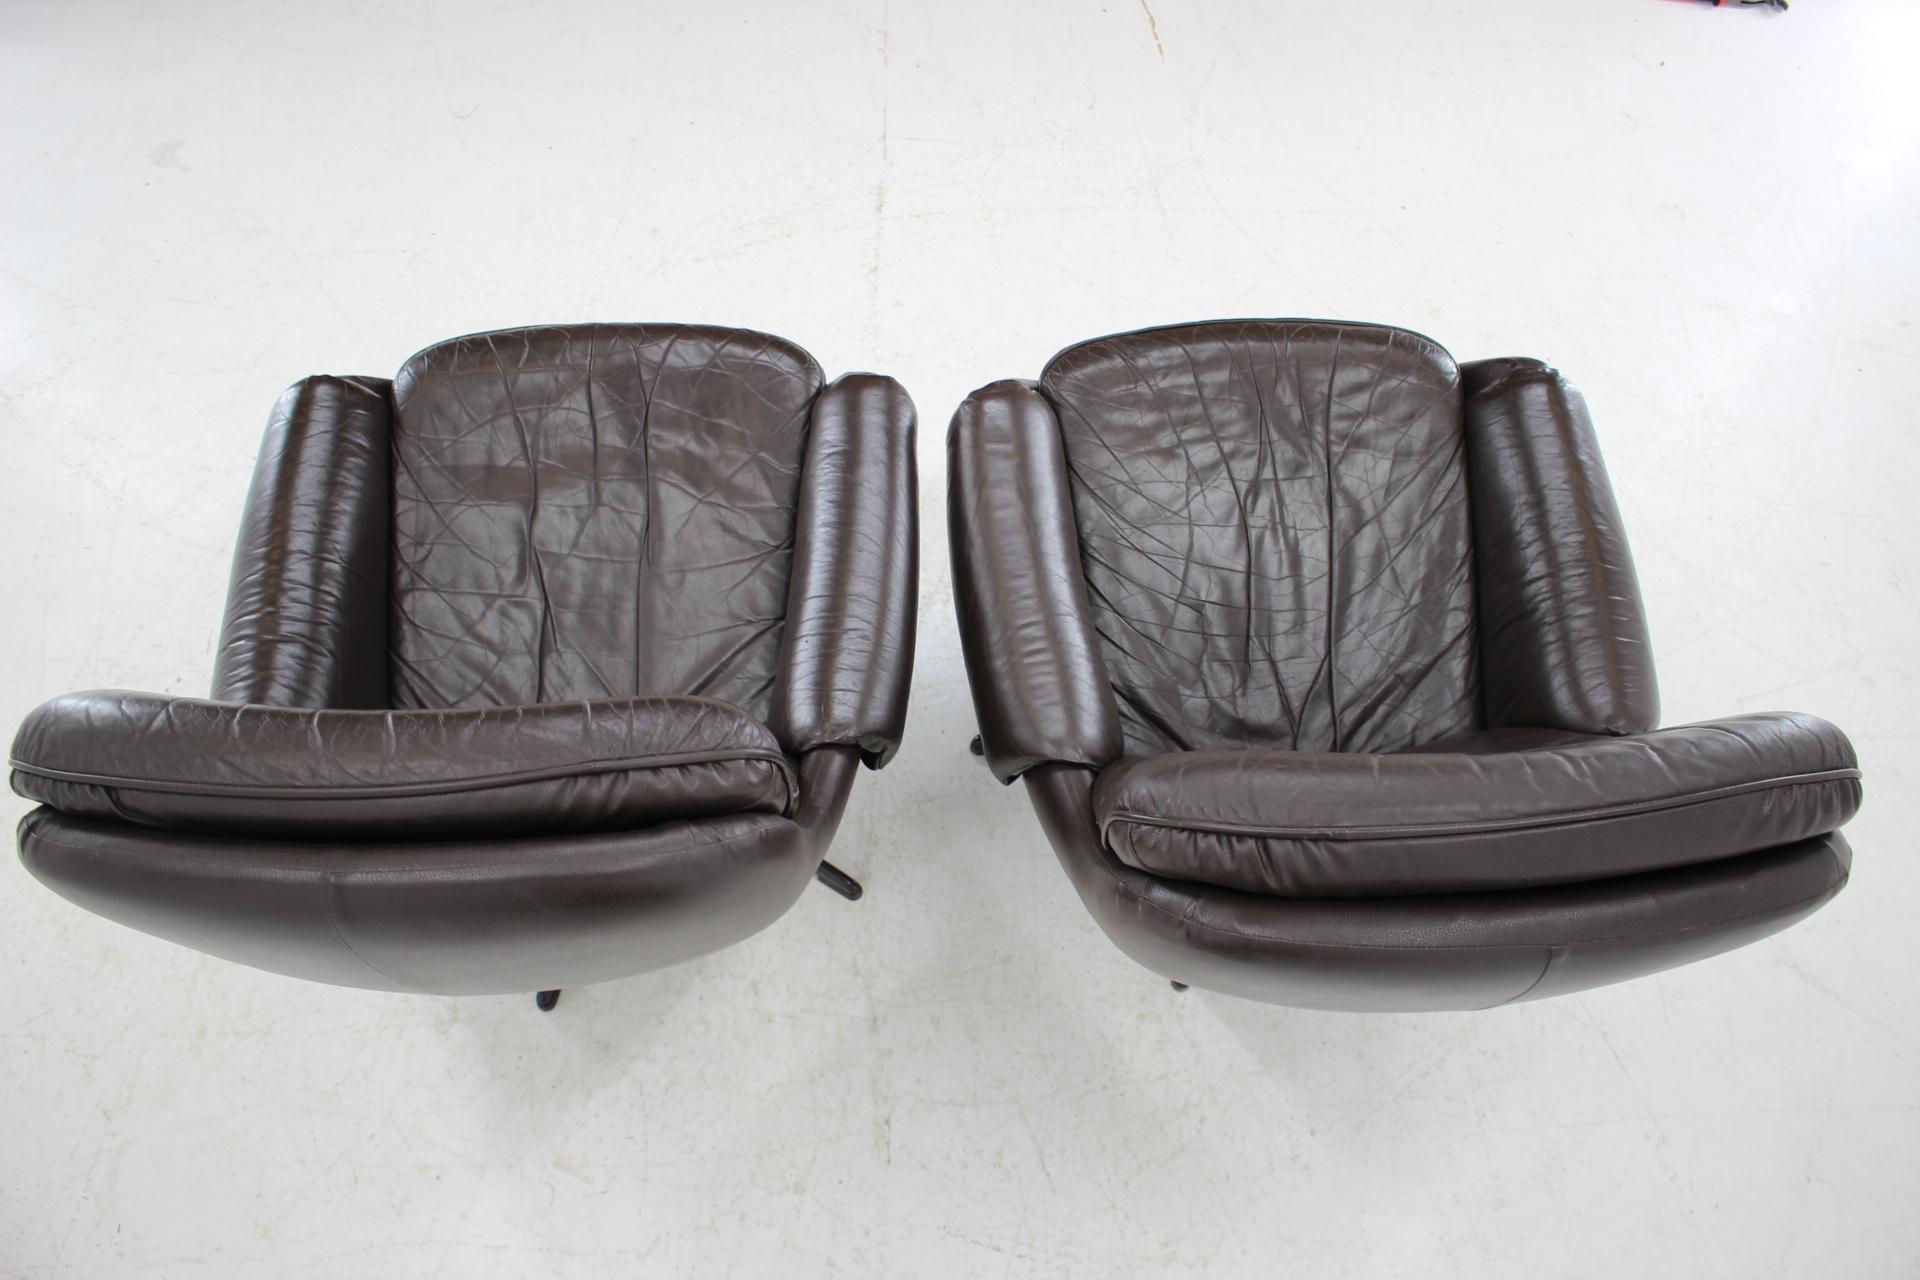 Late 20th Century Design Scandinavian Leather Armchair or Lounge Chair by PEEM, 1970s For Sale